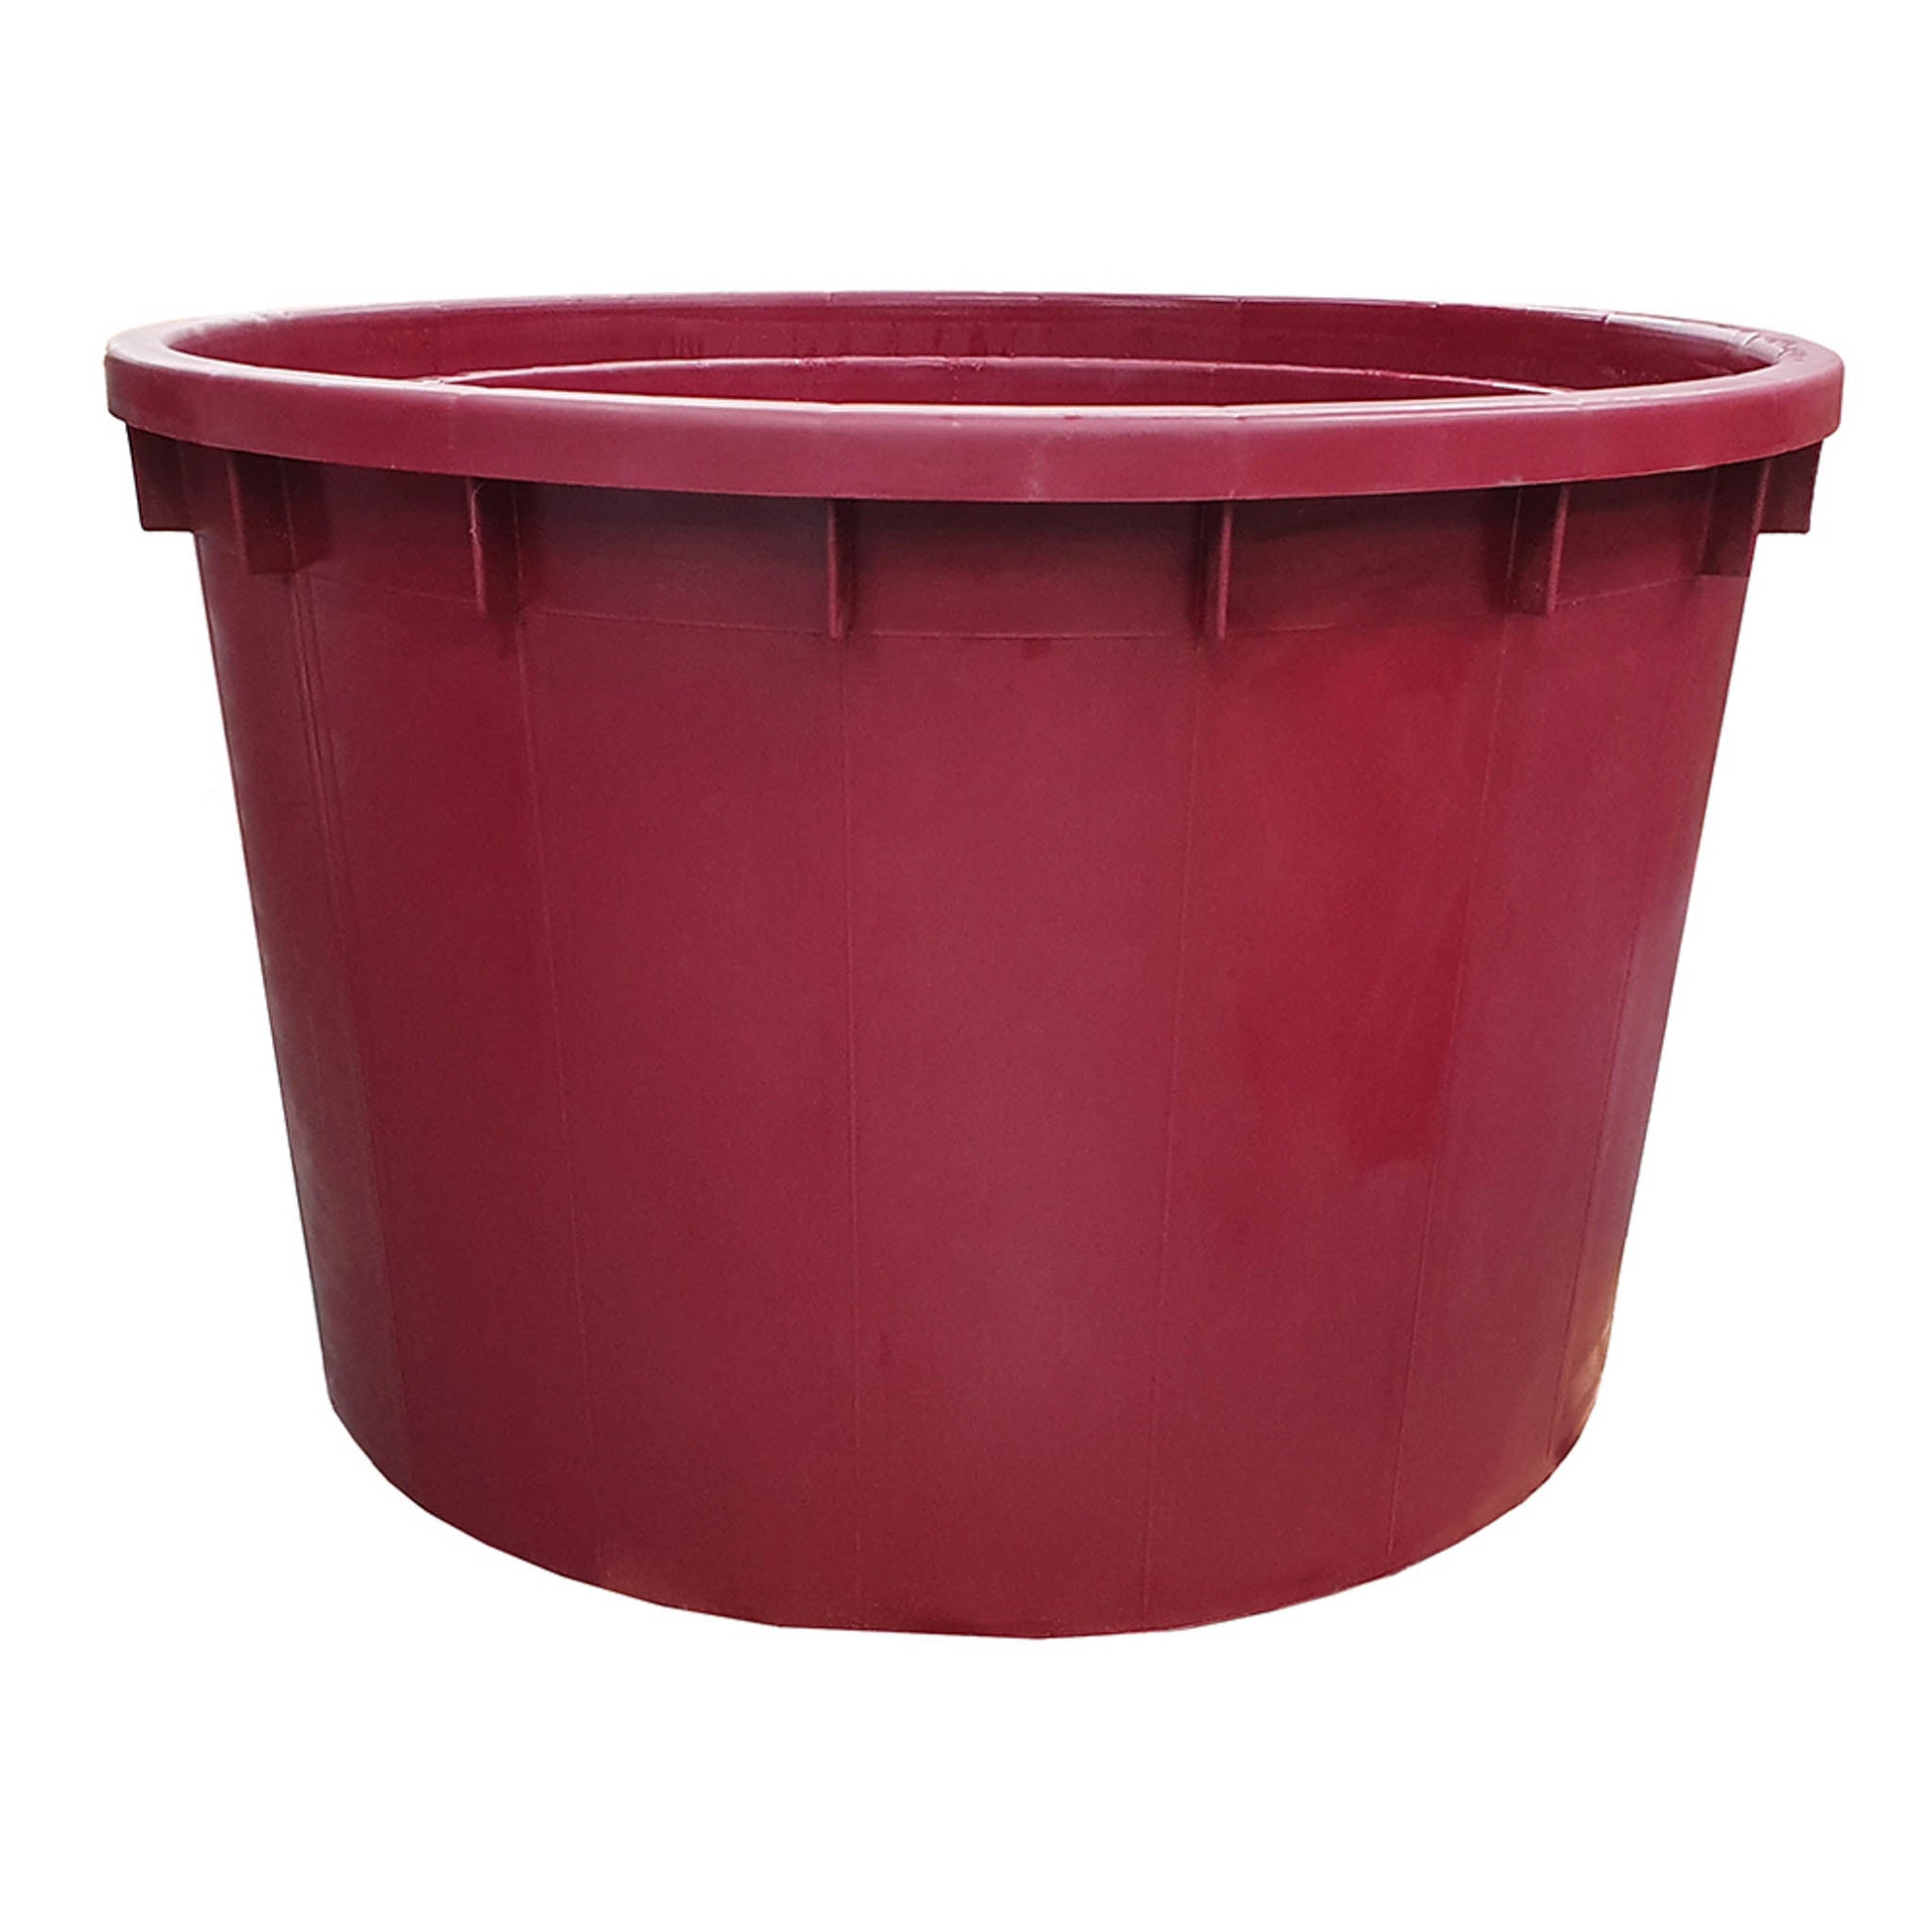 Italian made 750 litre red food grade plastic wine vat for storing and fermenting wine